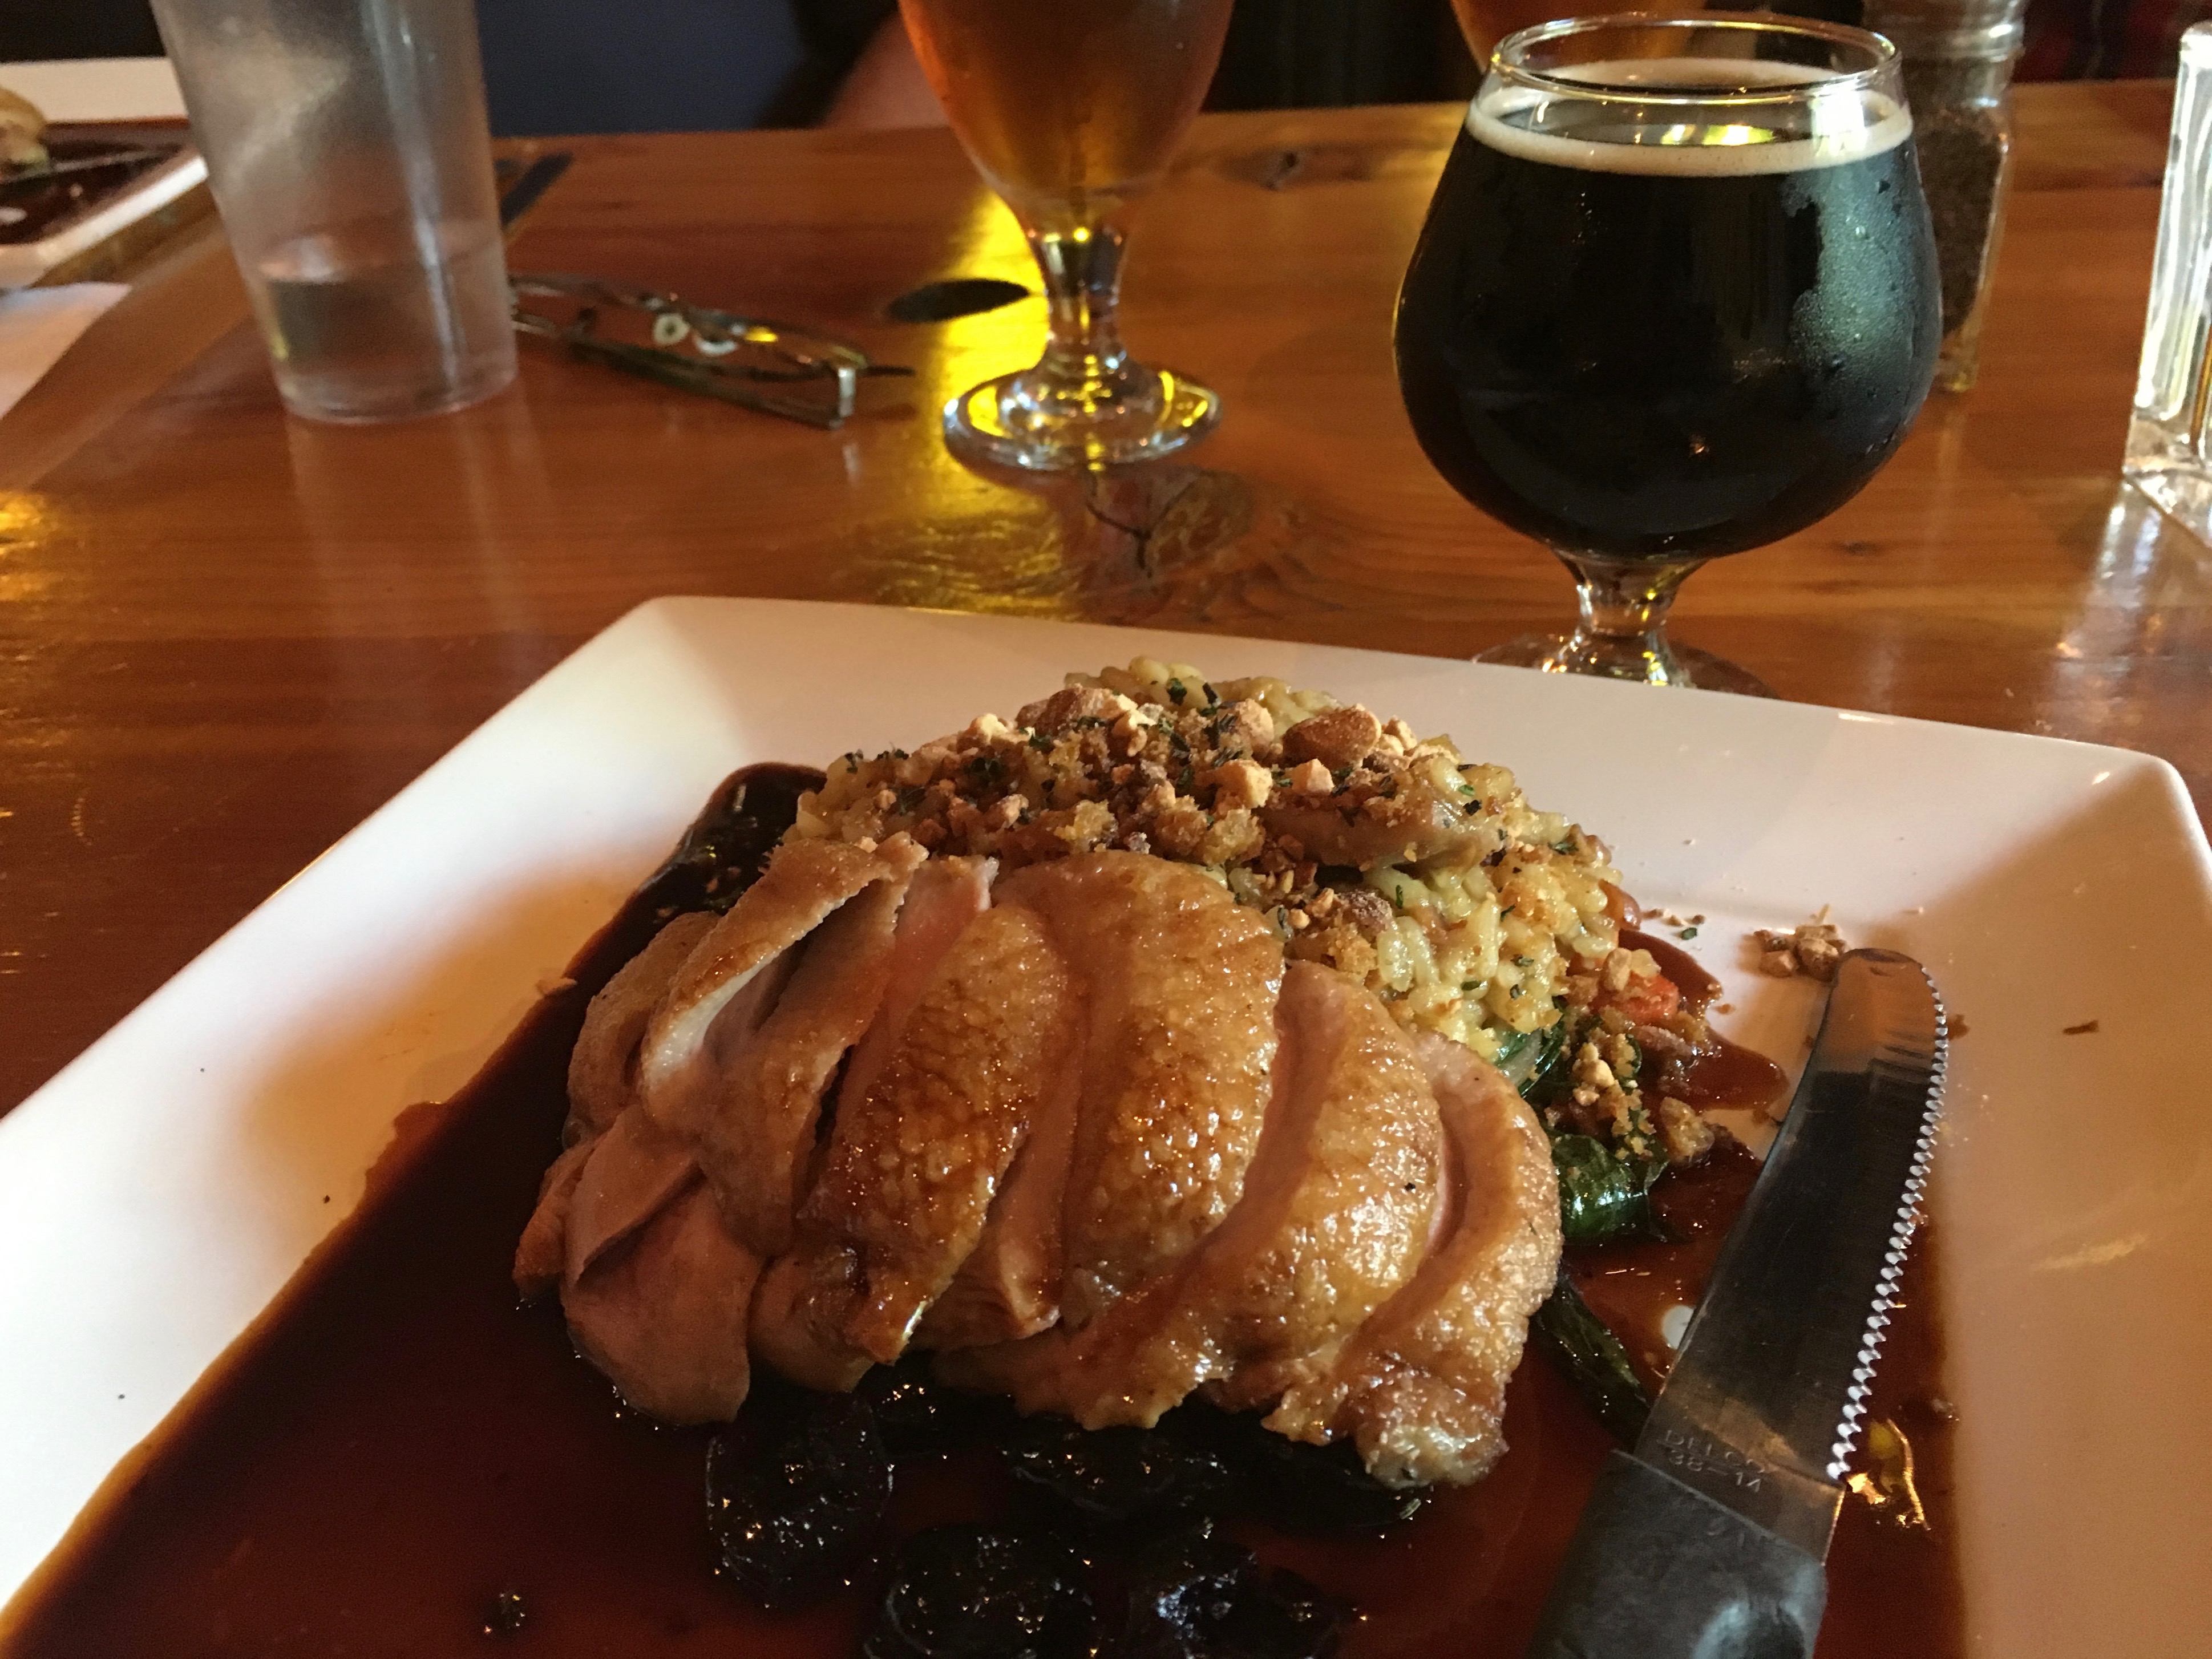 Fifth course will feature this pan seared duck breast. (photo by D.J. Paul)